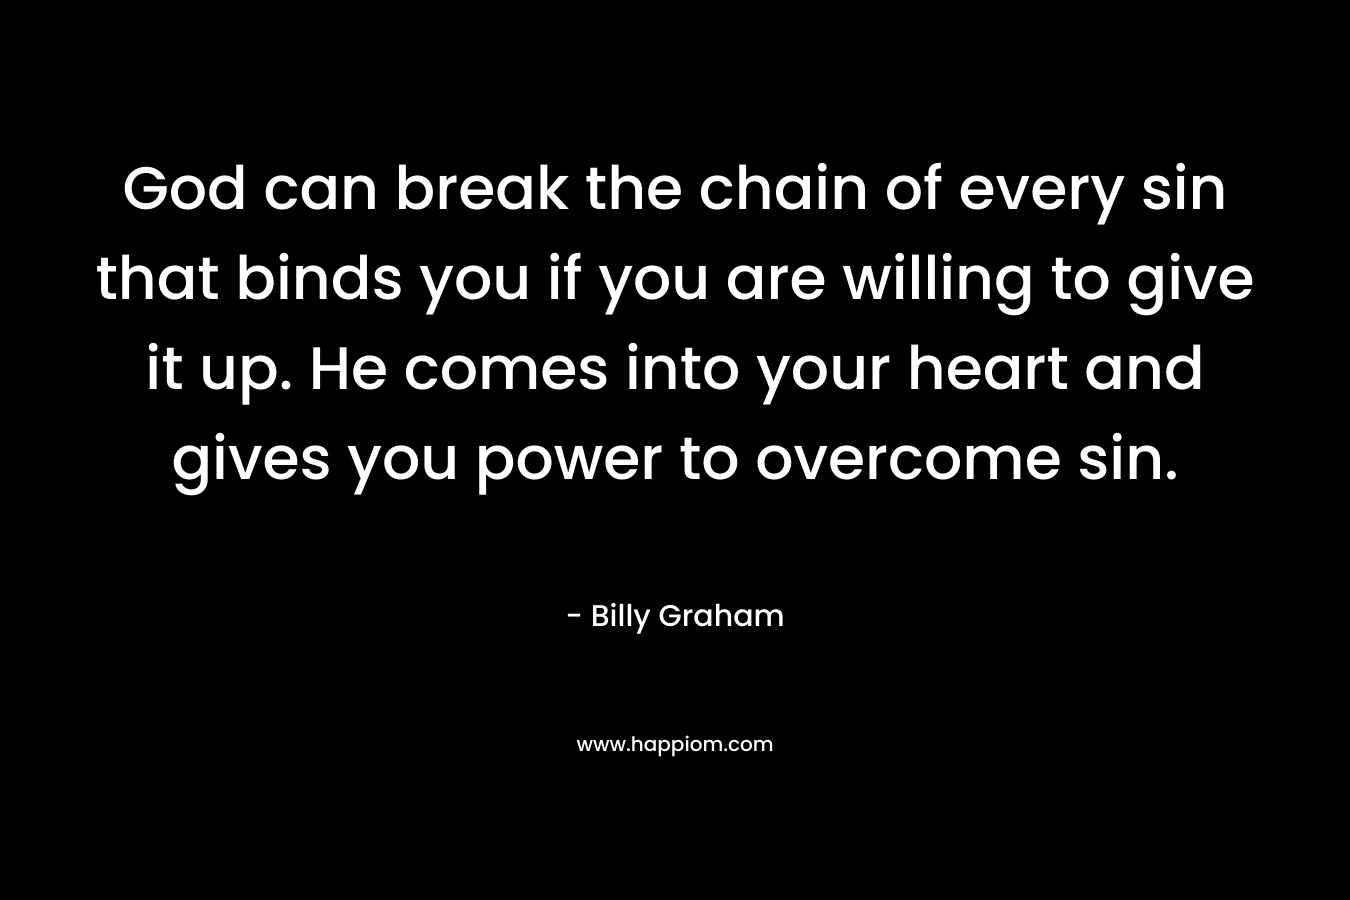 God can break the chain of every sin that binds you if you are willing to give it up. He comes into your heart and gives you power to overcome sin.